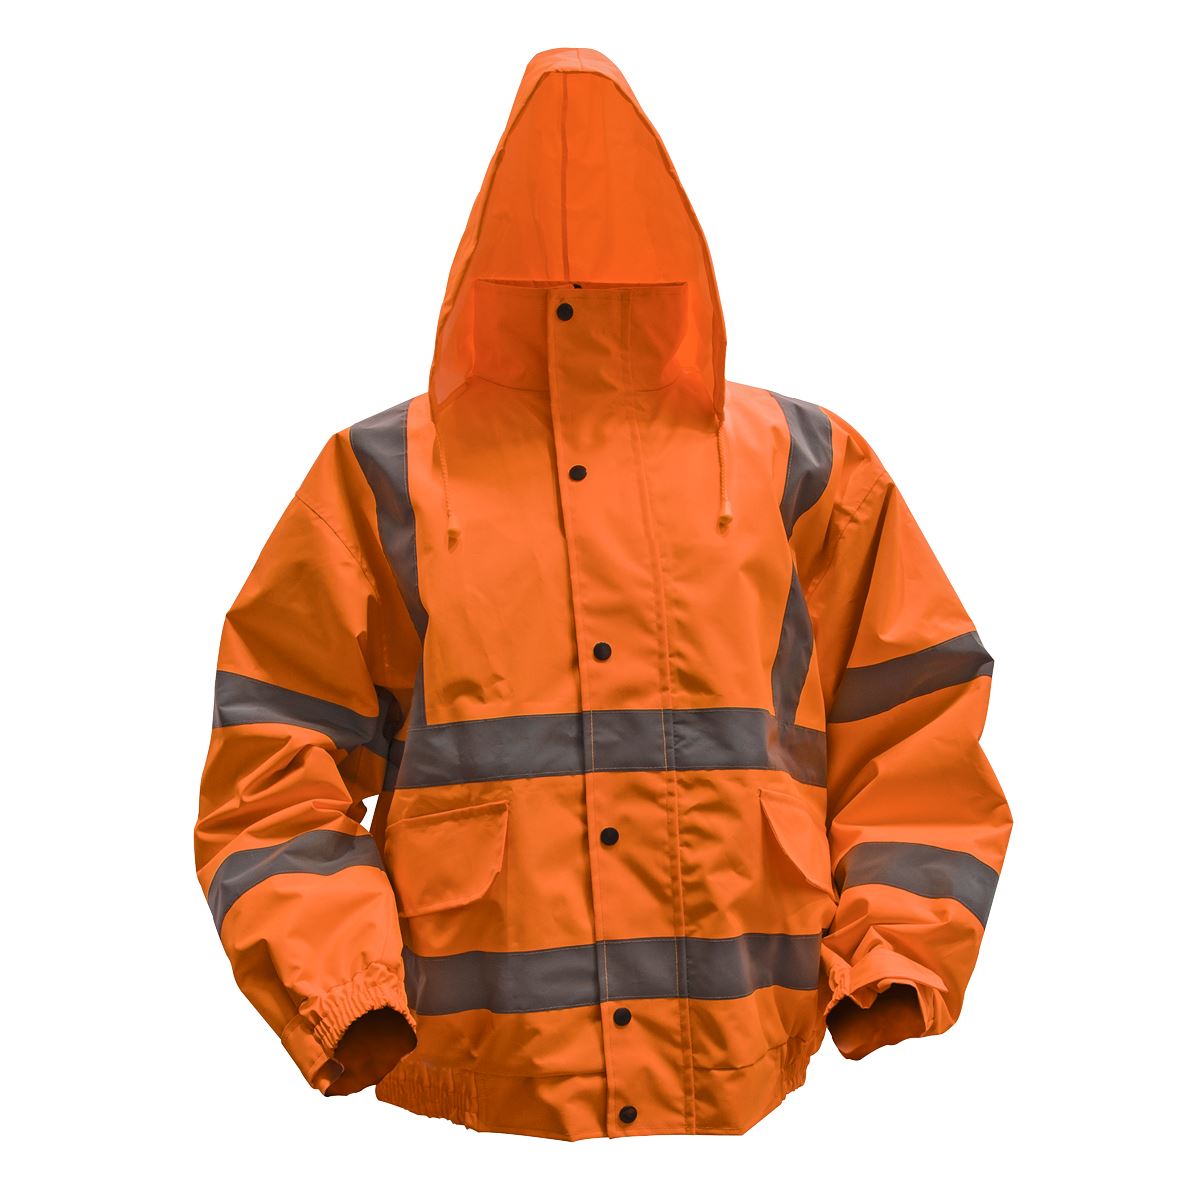 Worksafe by Sealey Hi-Vis Orange Jacket with Quilted Lining & Elasticated Waist - XX-Large